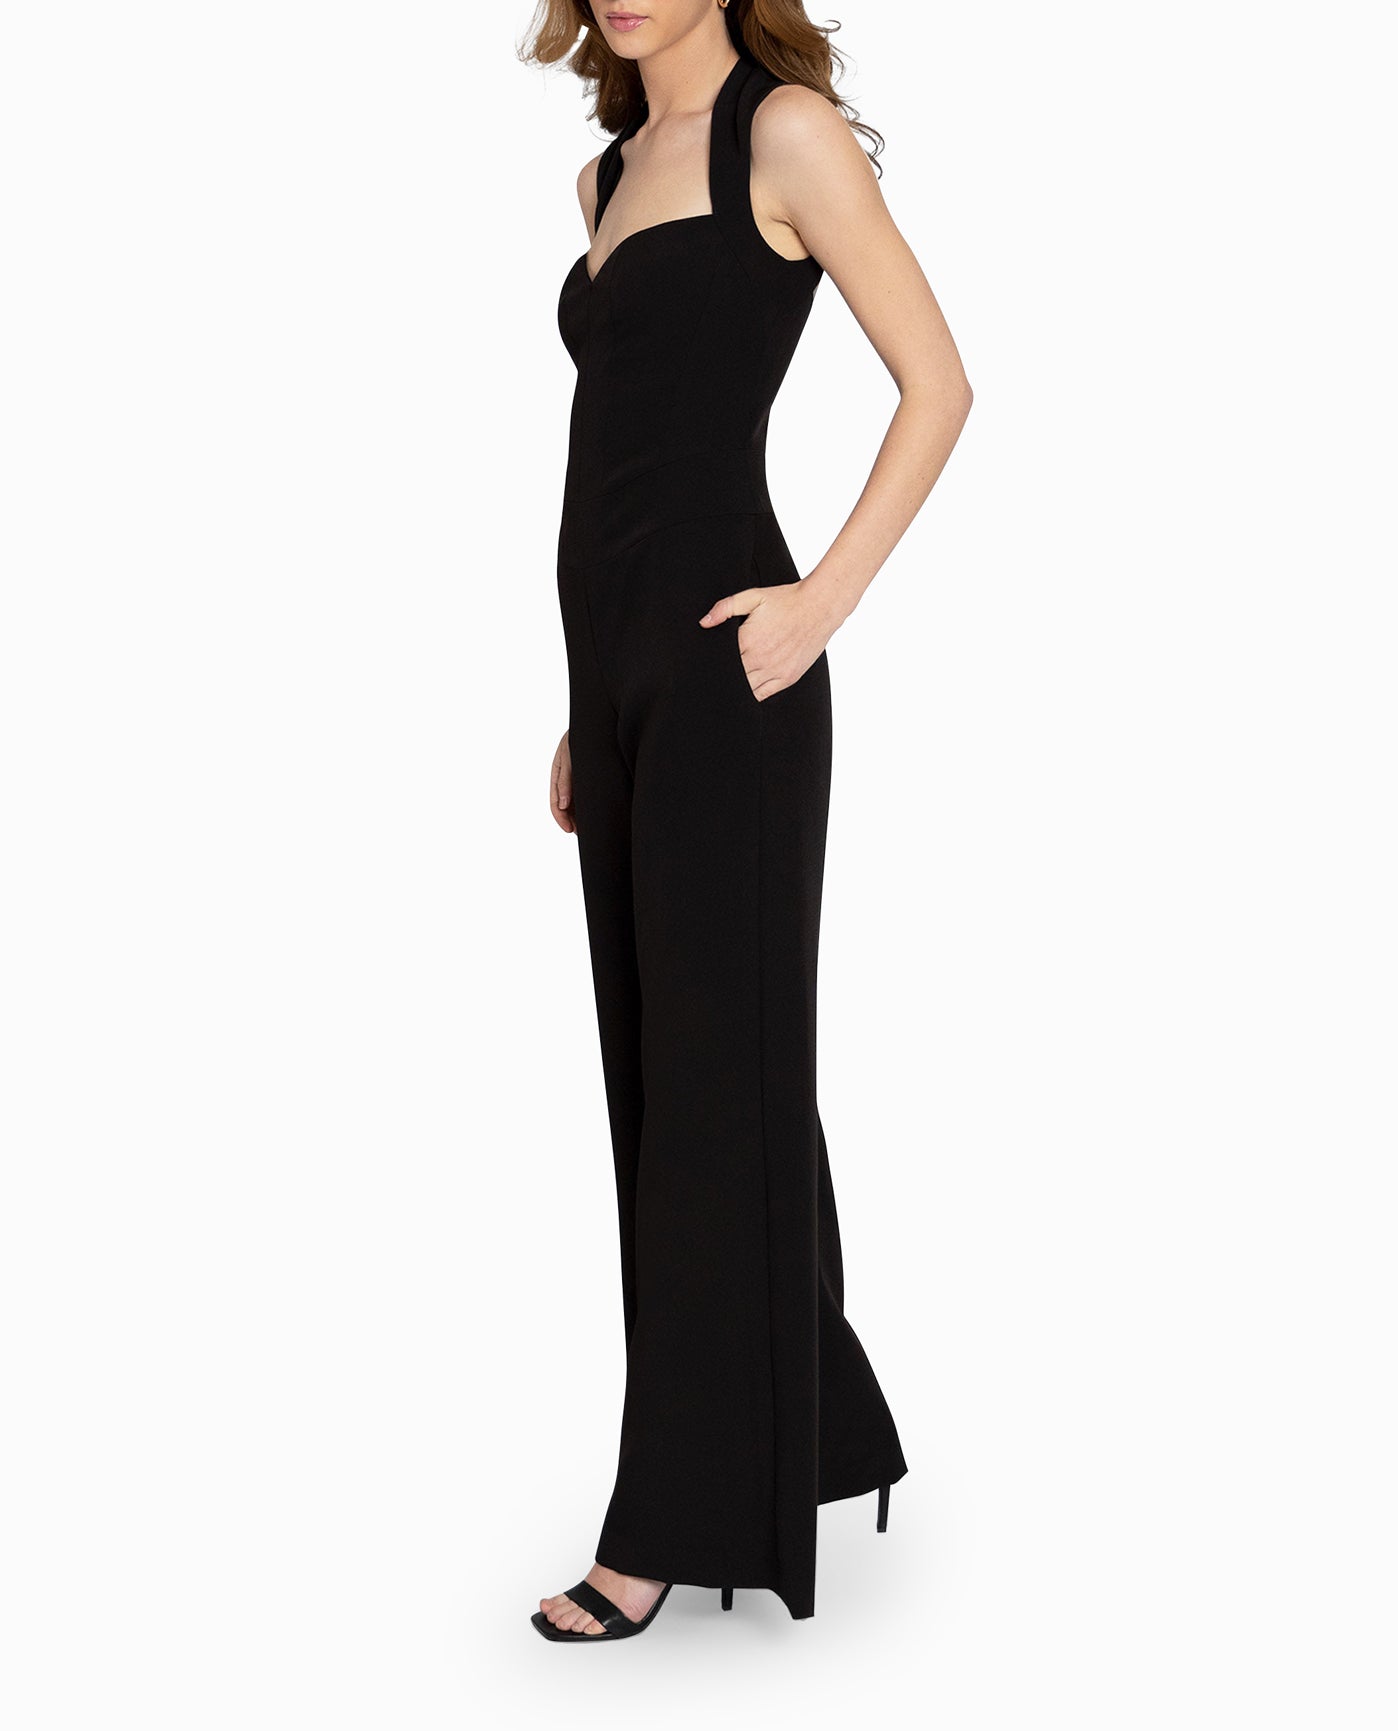 SIDE OF JUMPSUIT WITH HAND IN SIDE POCKET | BLACK